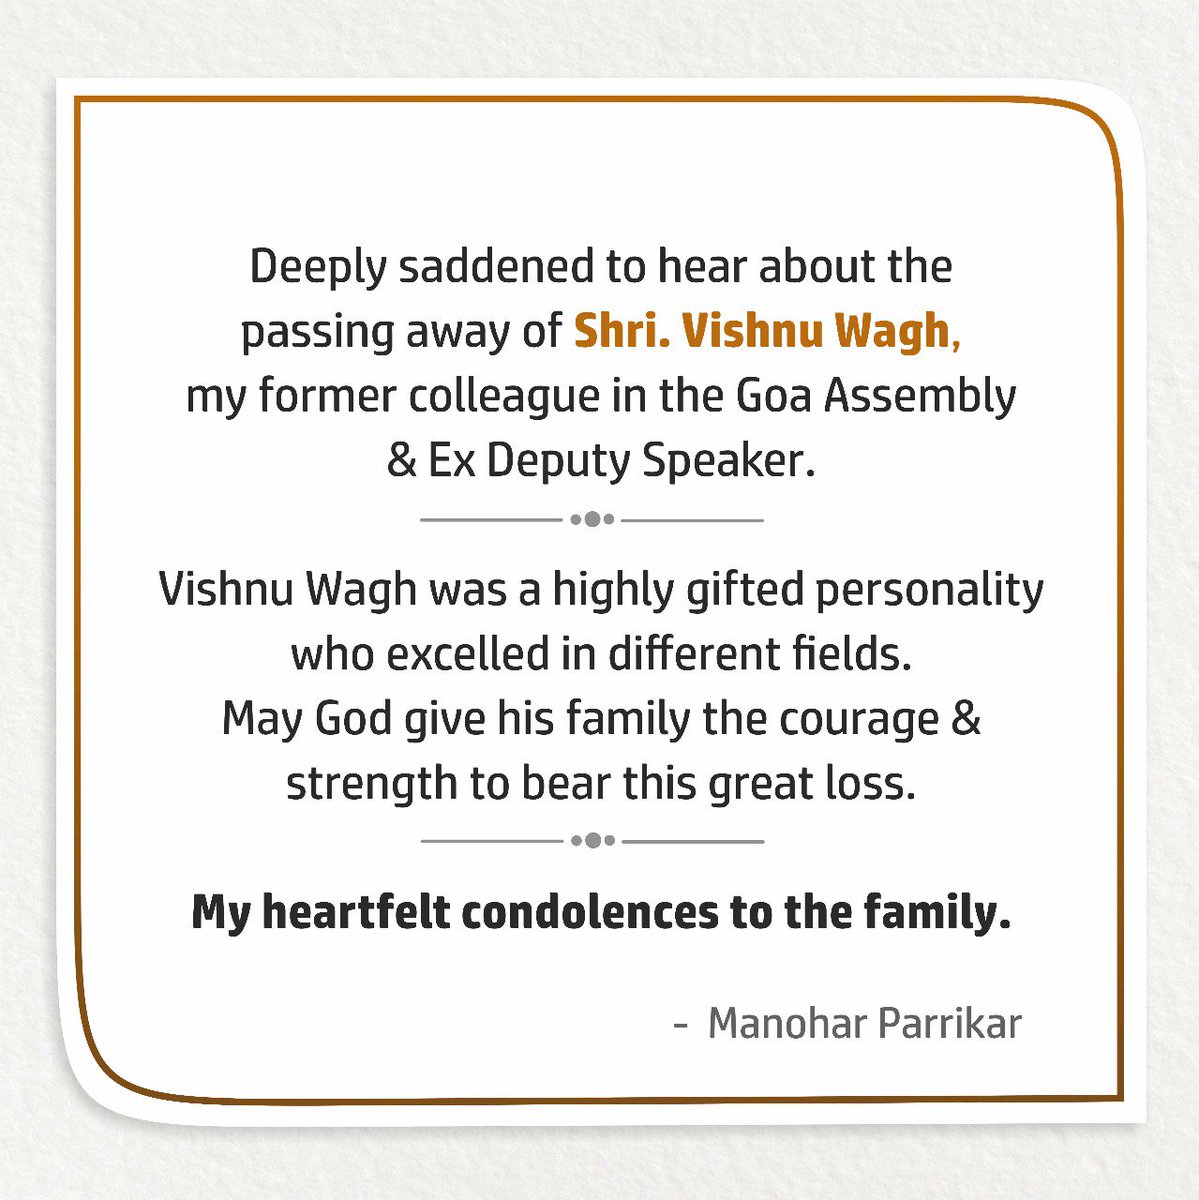 Deeply saddened to hear about the passing away of Shri. Vishnu Wagh, my former colleague in Goa Assembly & Ex Deputy Speaker.